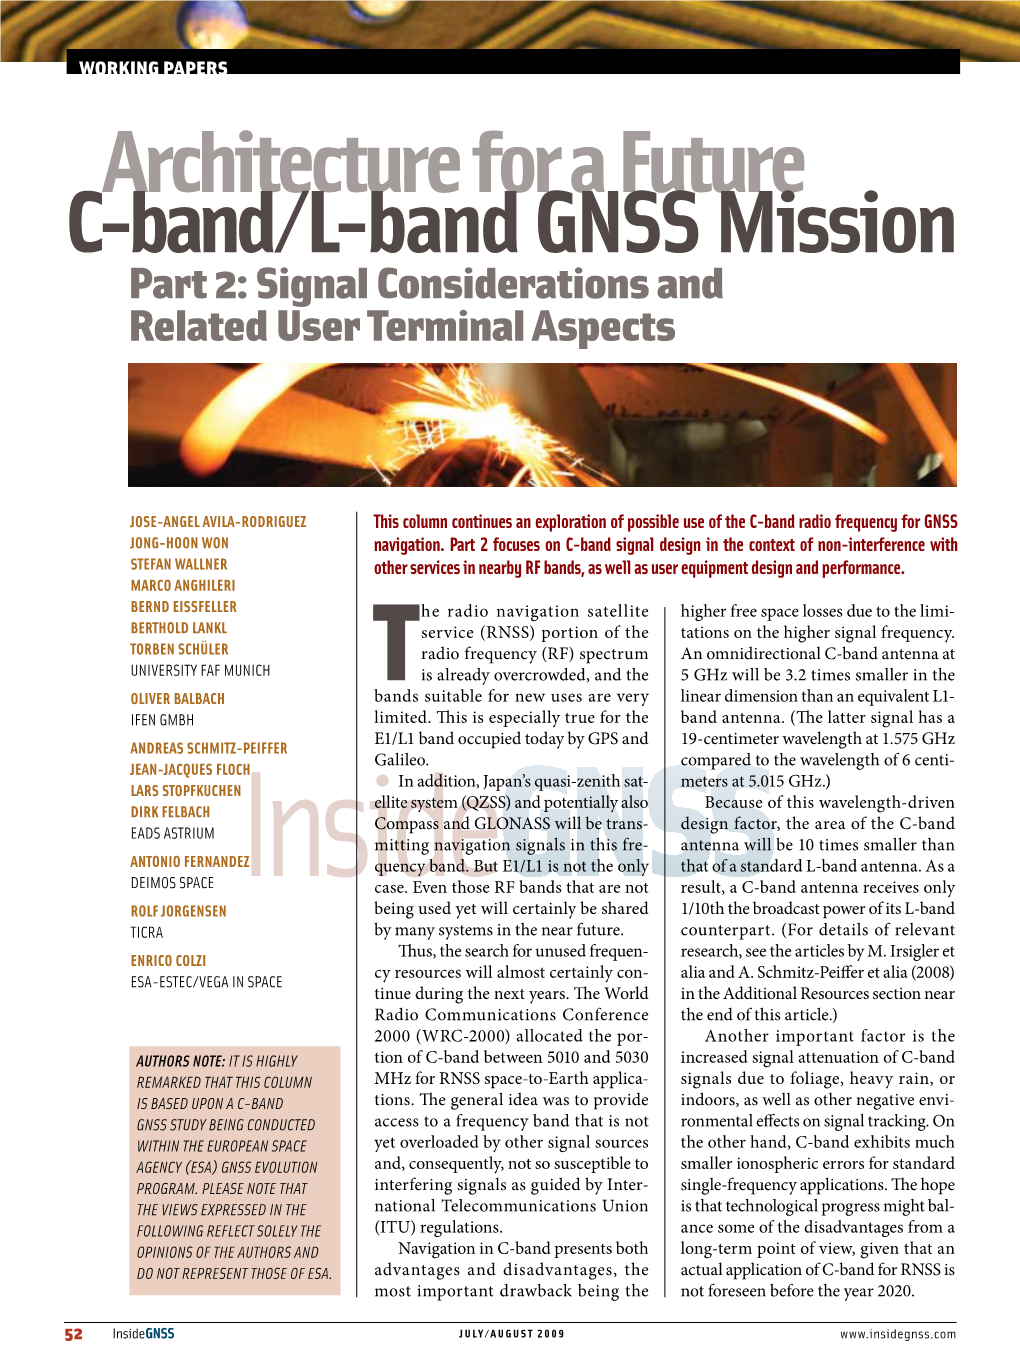 Architecture for a Future C-Band/L-Band GNSS Mission Part 2: Signal Considerations and Related User Terminal Aspects